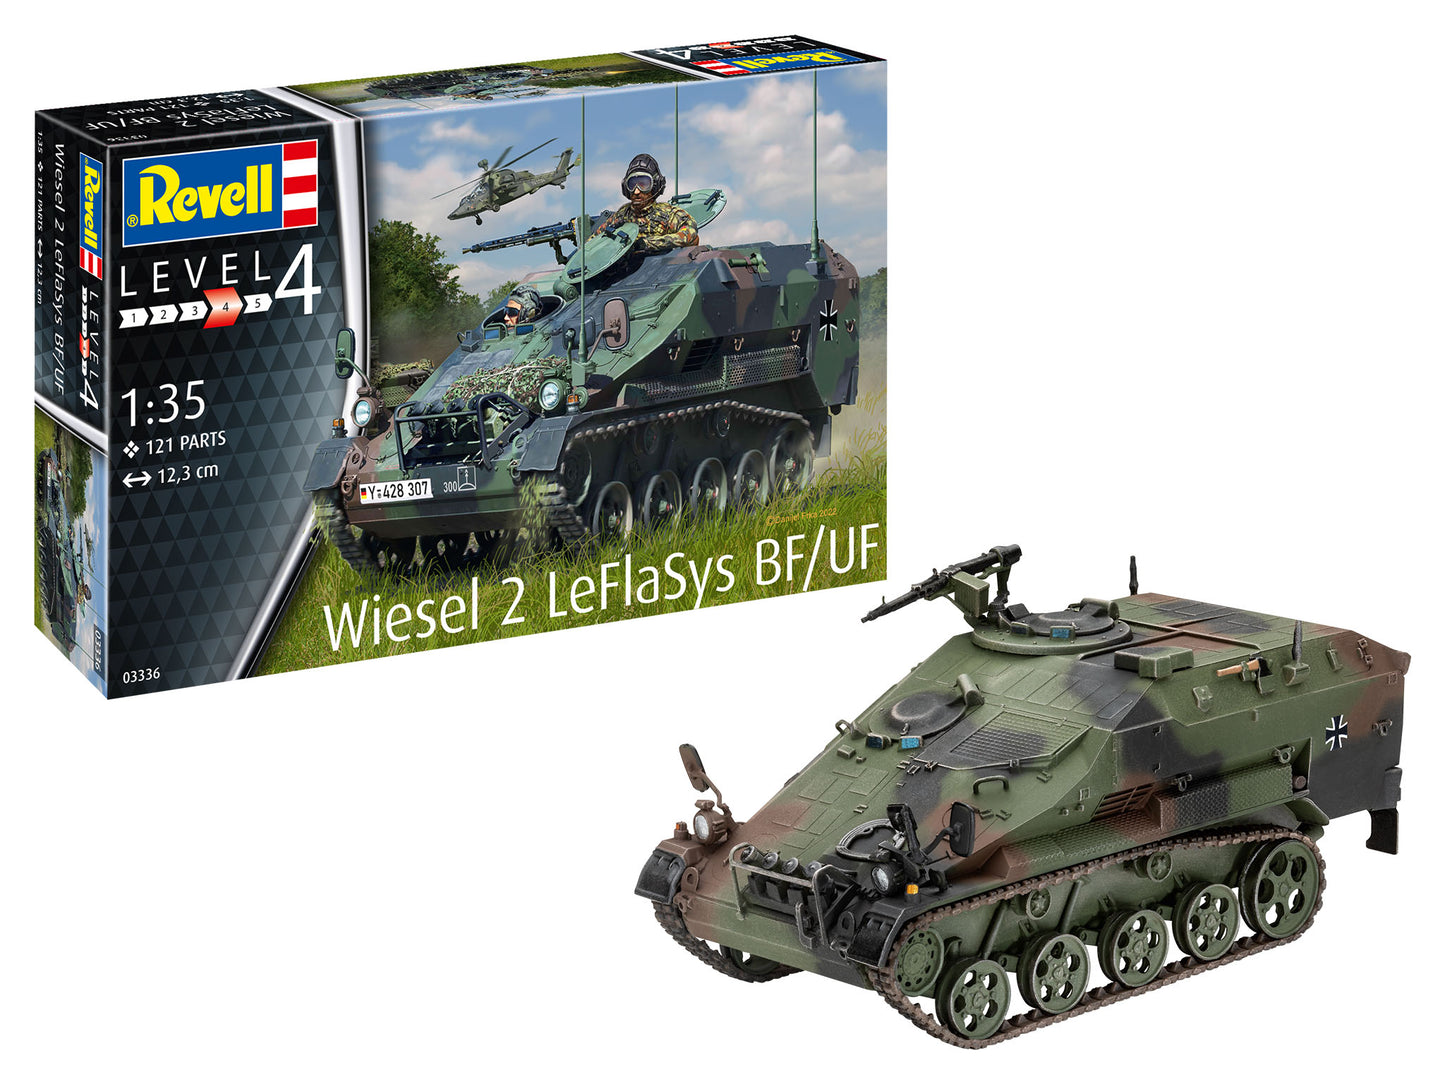 Revell of Germany 03336 1:35 Wiesel 2 LeFlaSys BF/UF Military Vehicle Model Kit